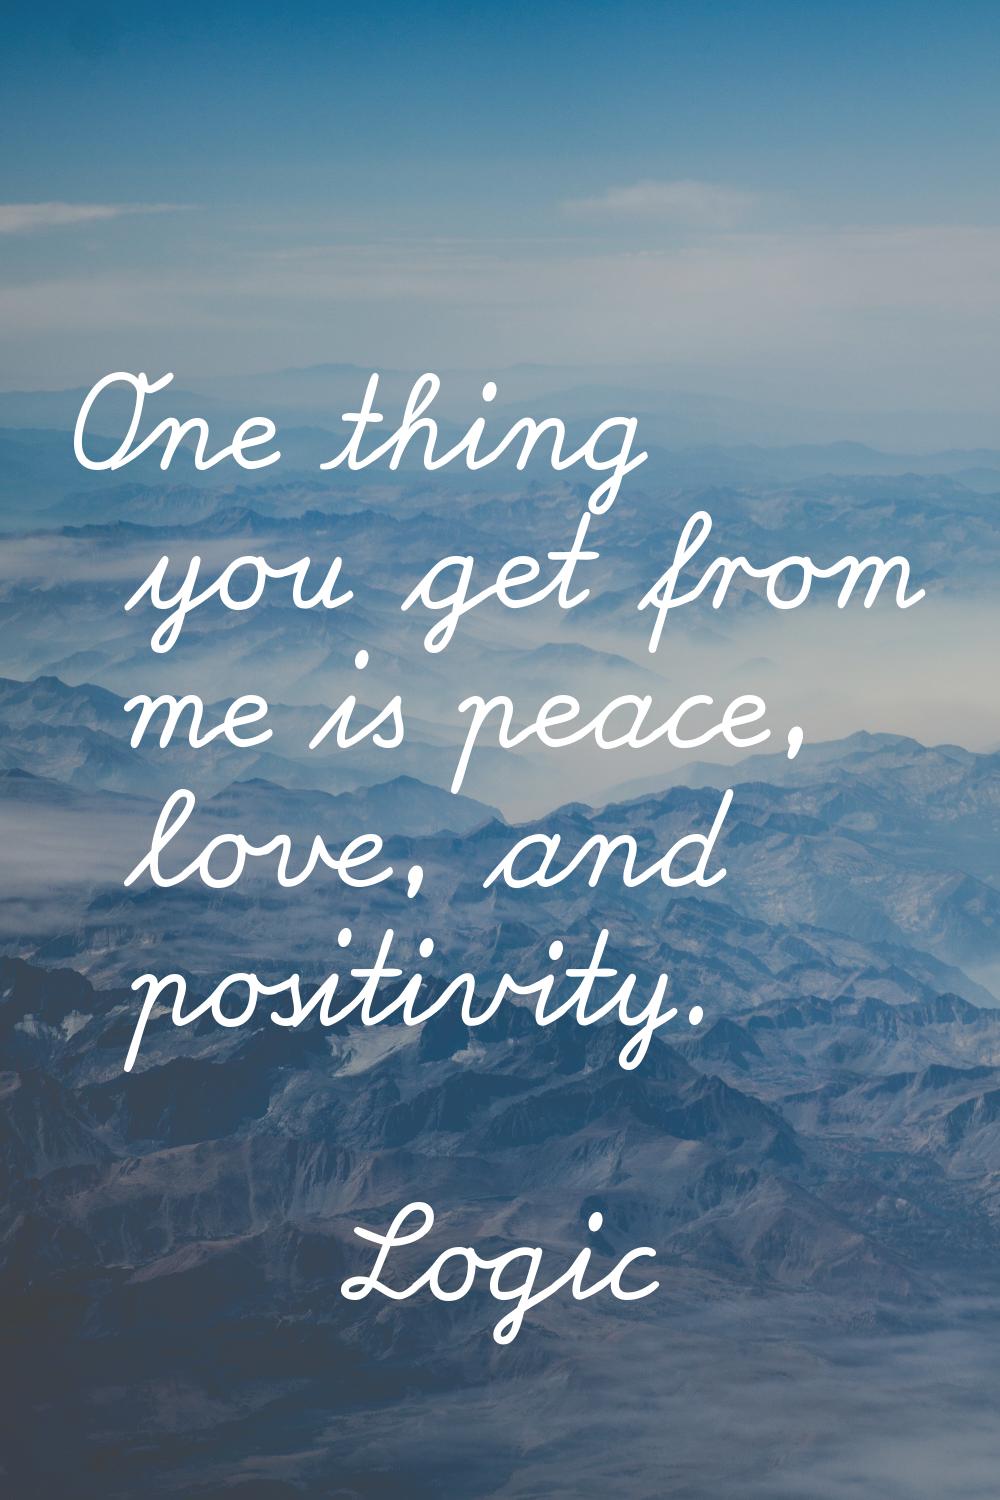 One thing you get from me is peace, love, and positivity.